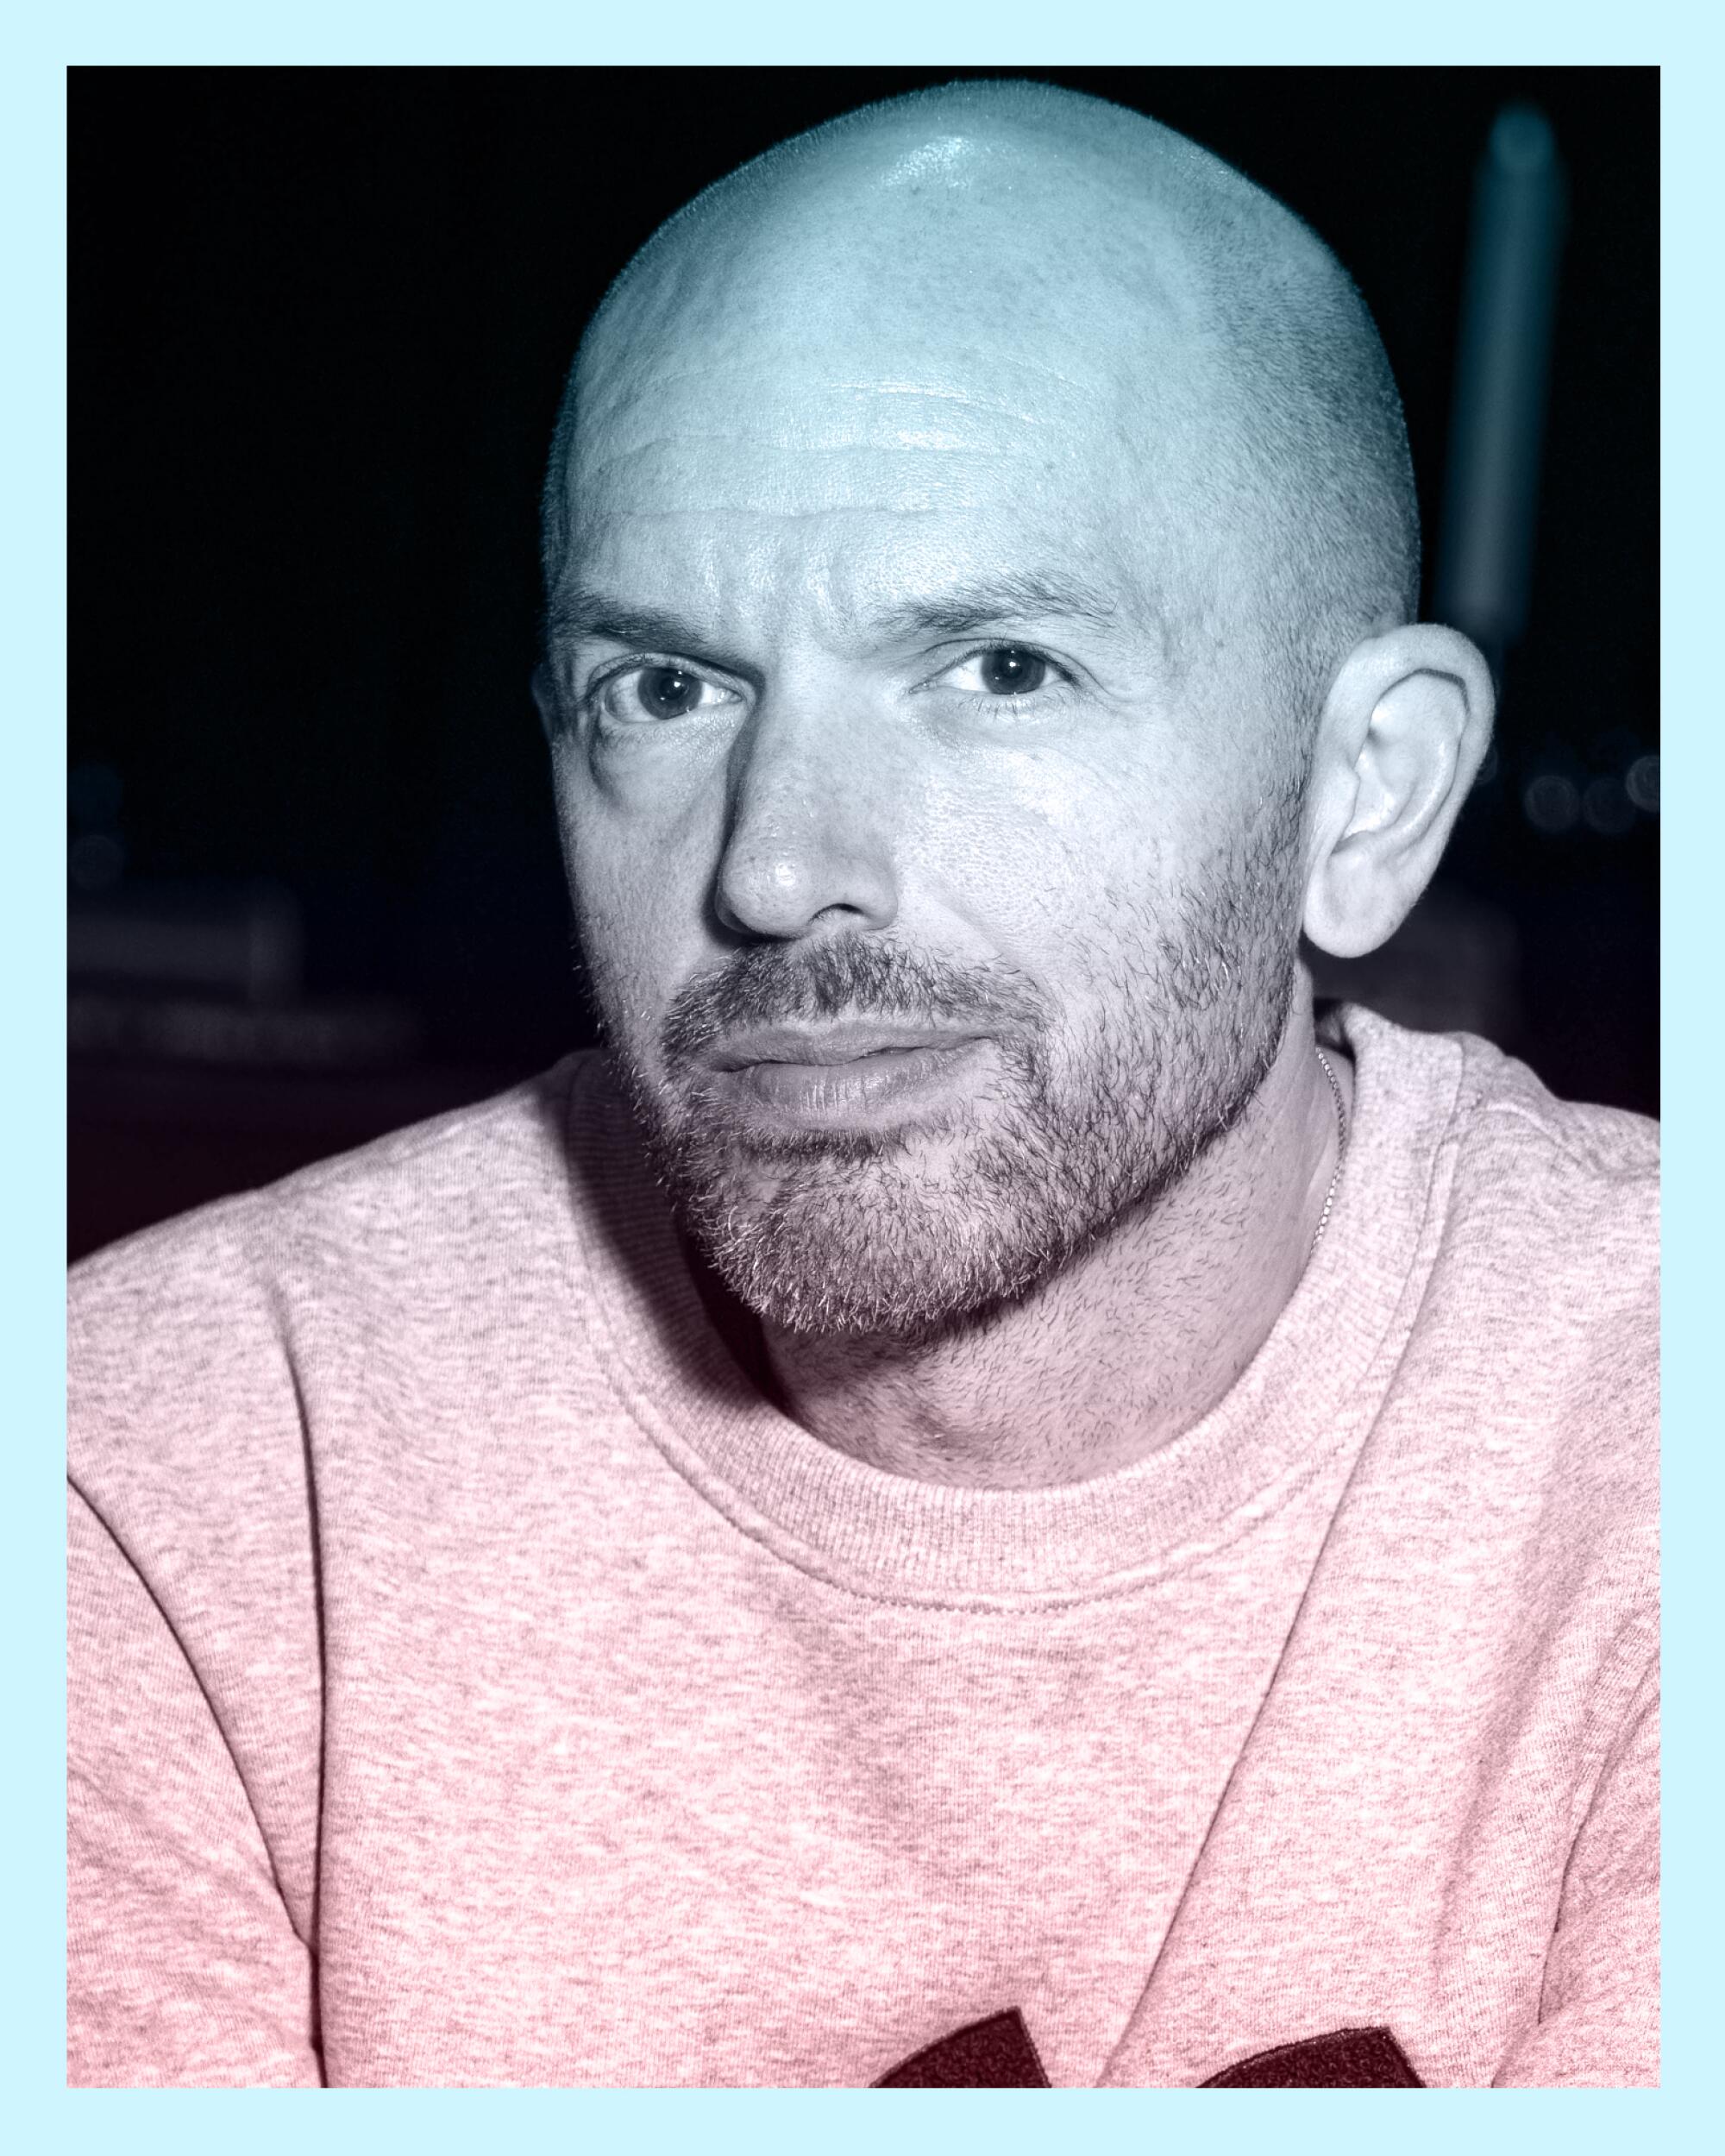 Paul Scheer with a bald head and scraggly beard and mustache